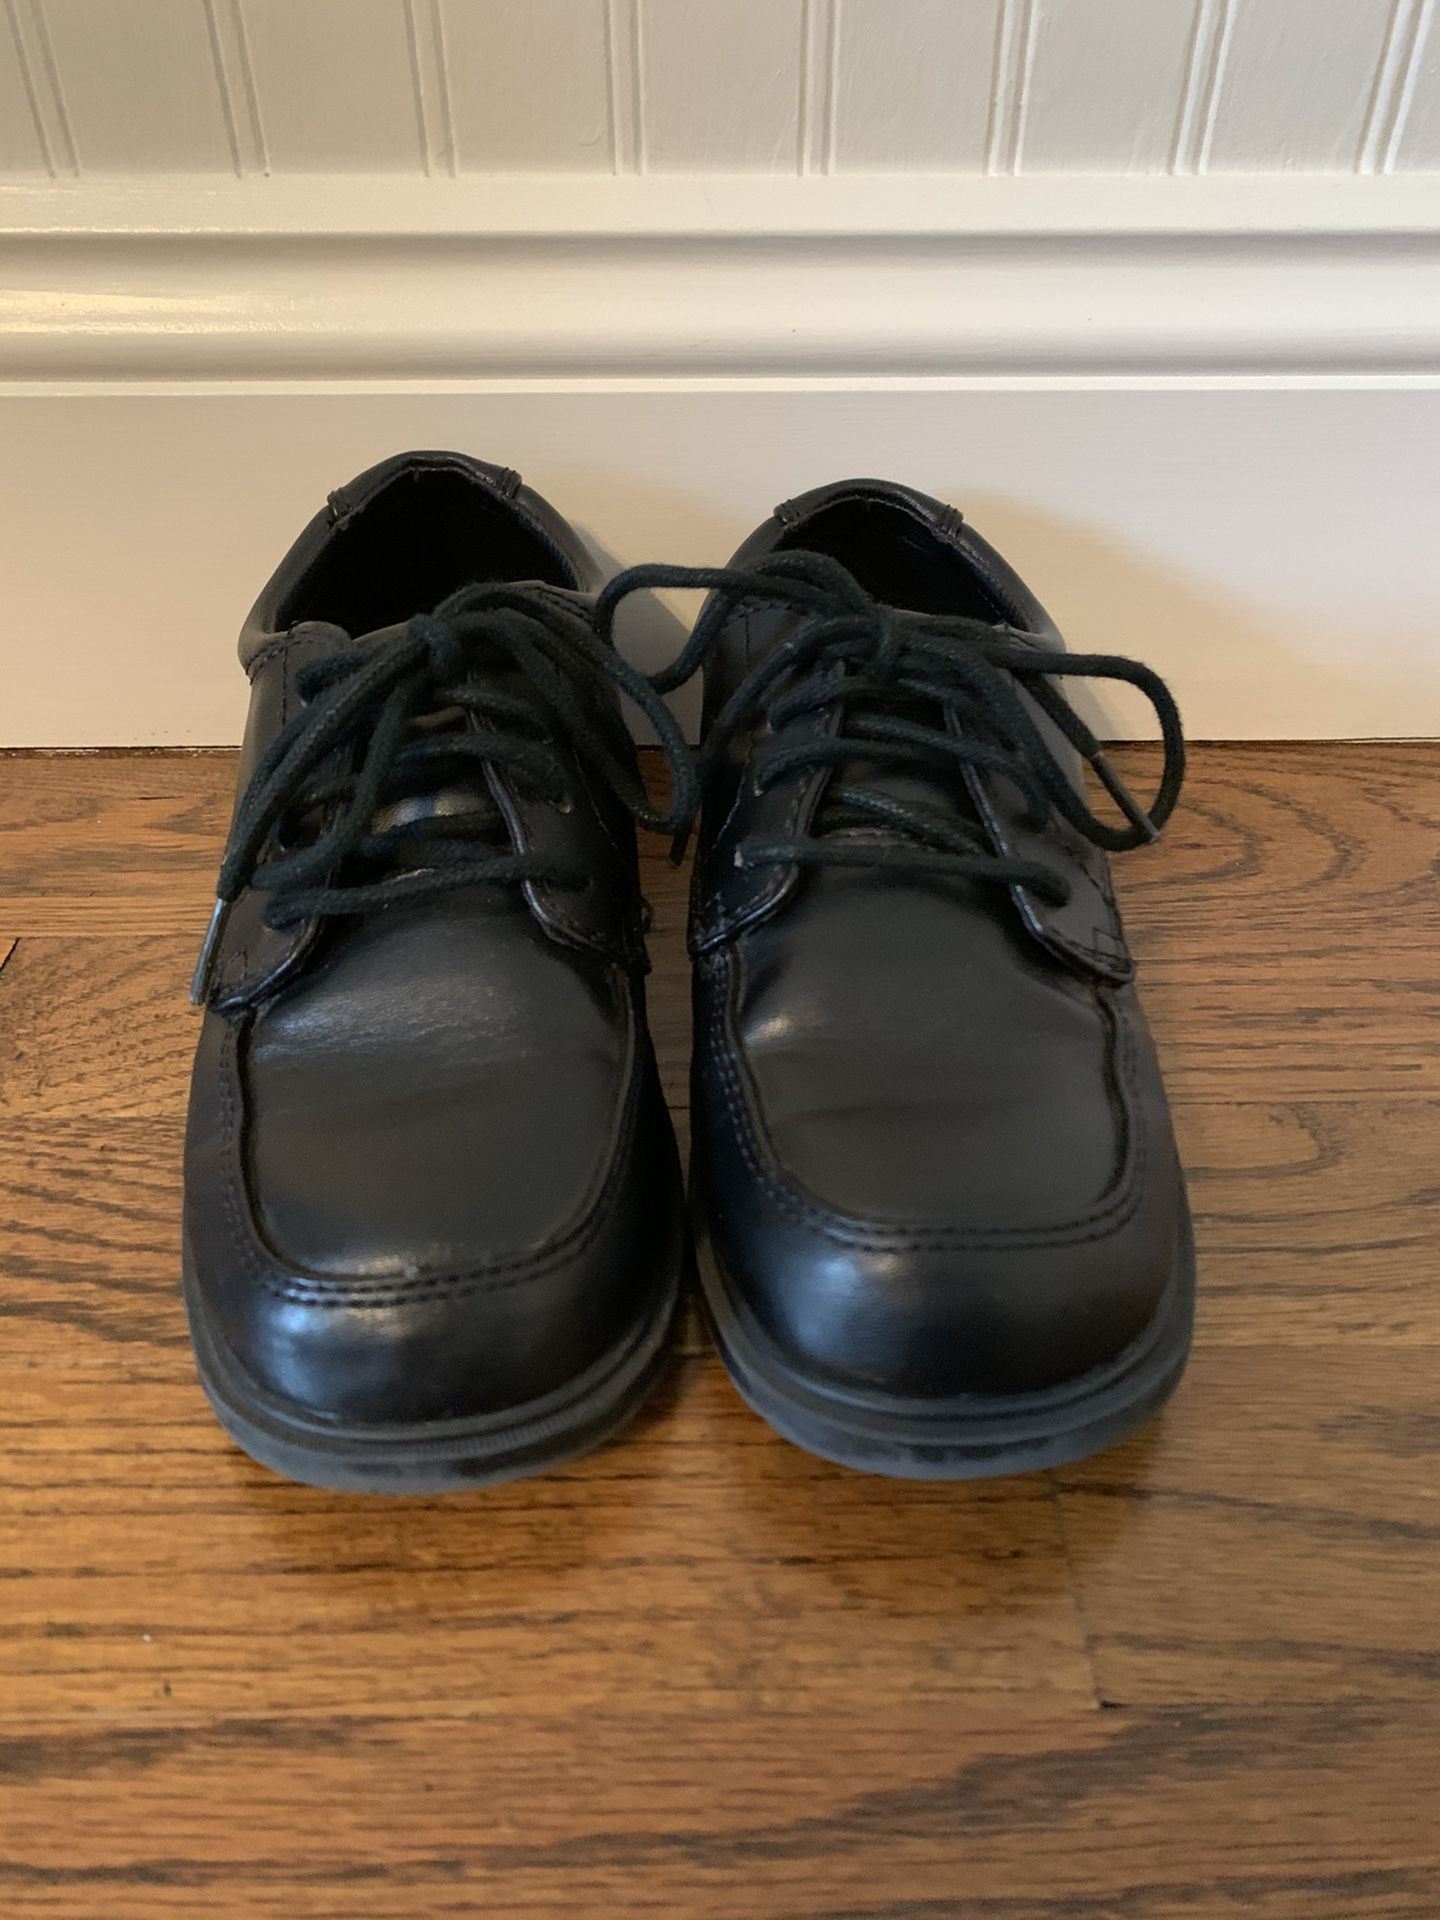 Buster Brown boys Size 1 black lace up dress shoes